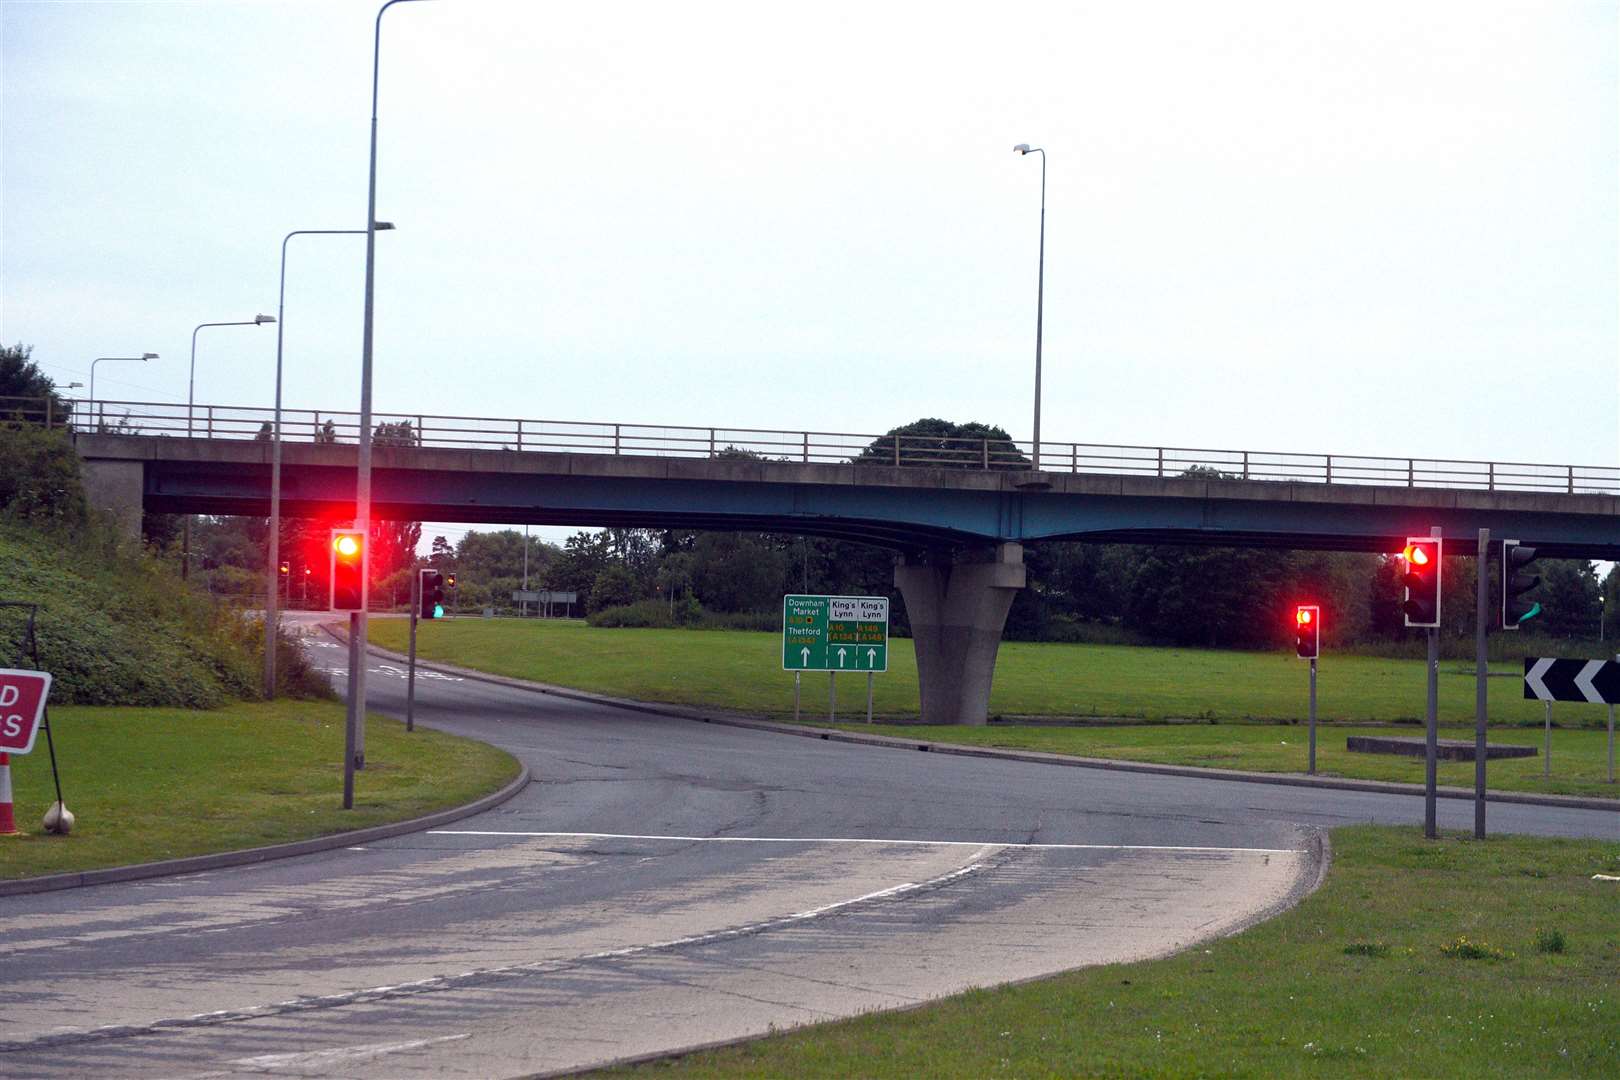 Drivers using Lynn’s Hardwick roundabout may be impacted by five weeks’ worth of lane closures